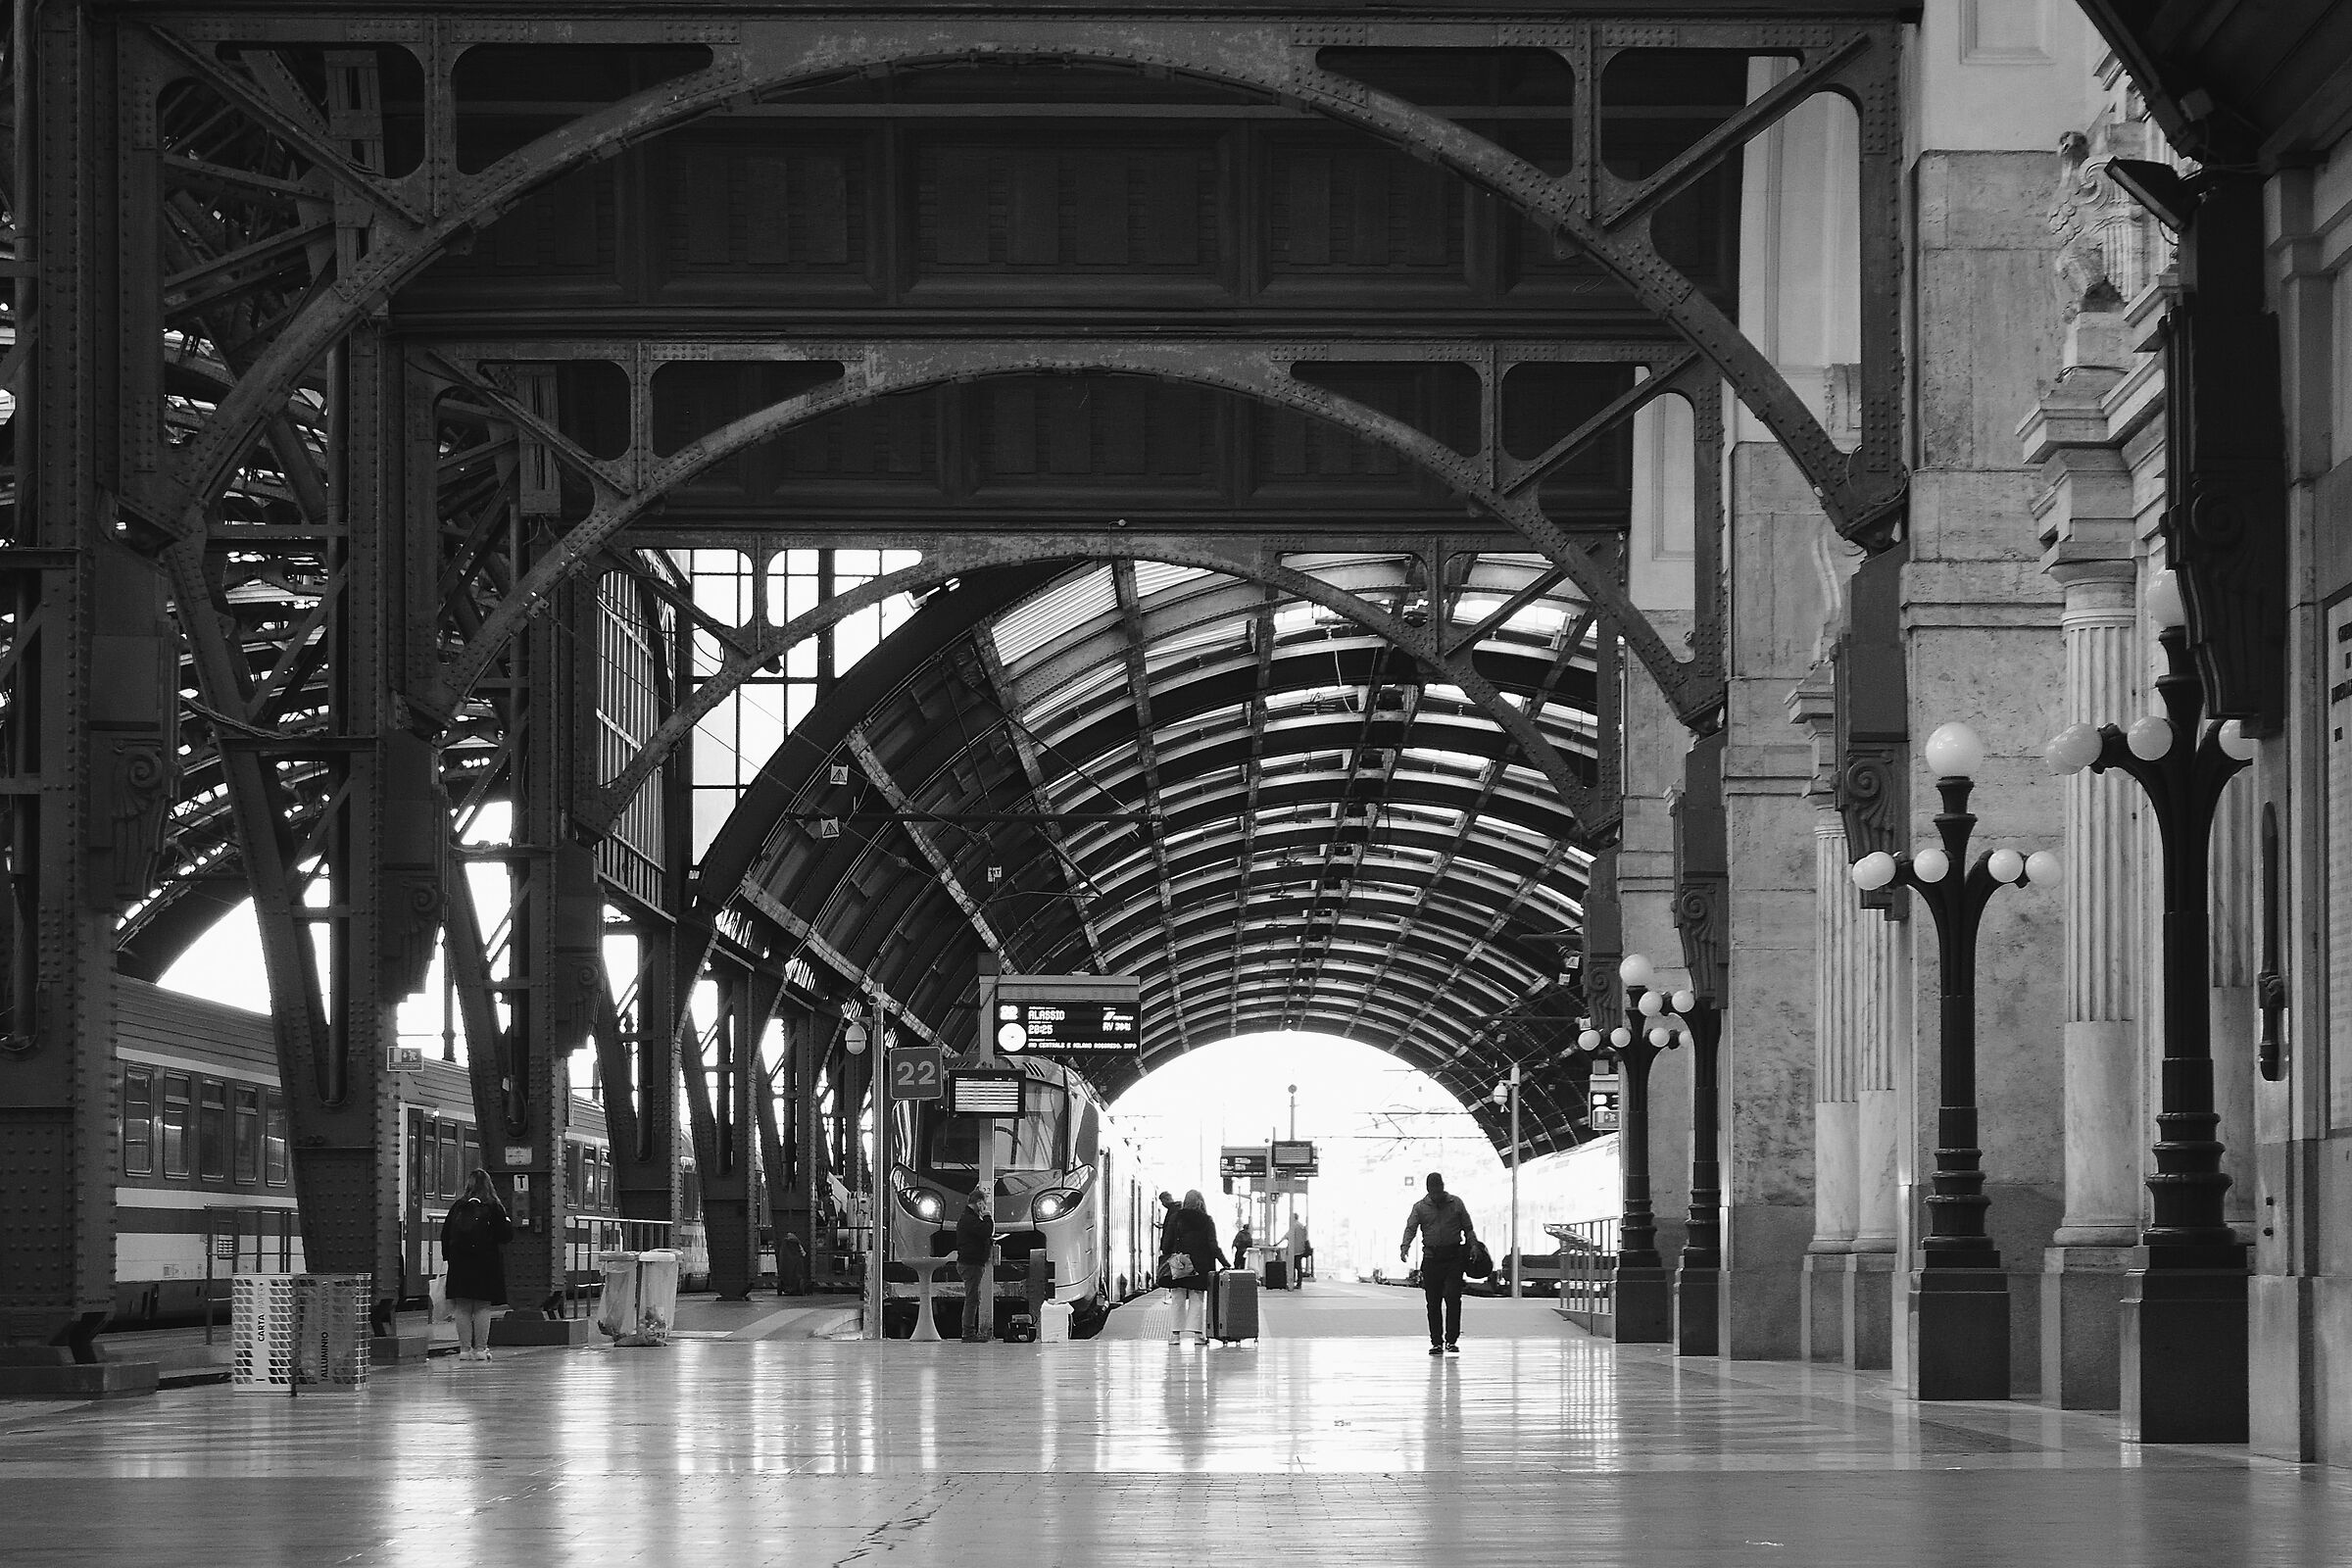 The Central Station of Milan...